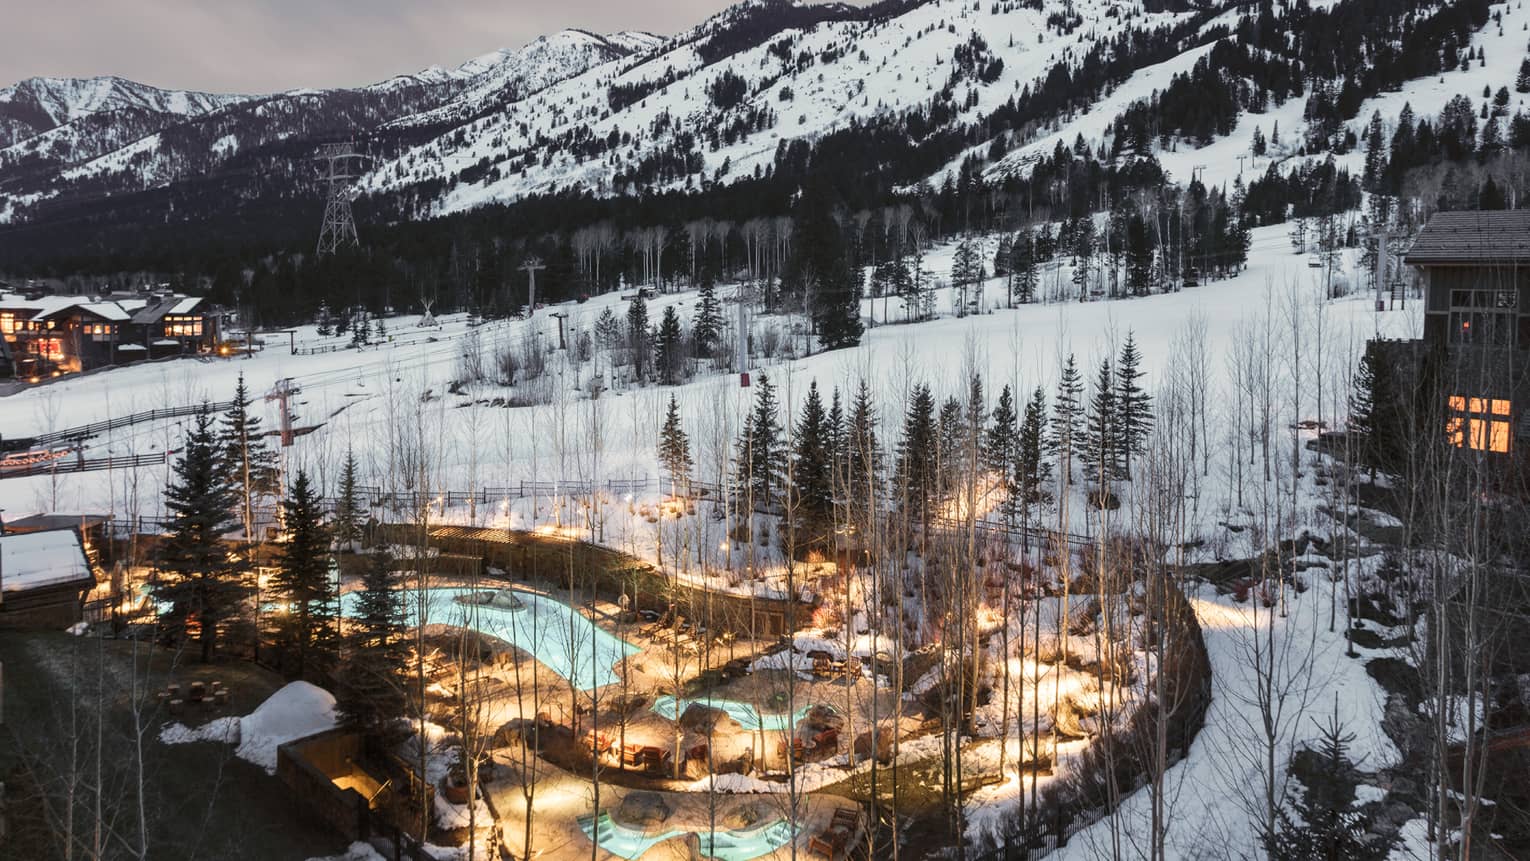 Aerial view of illuminated blue outdoor swimming pool through trees on snowy hill at dusk